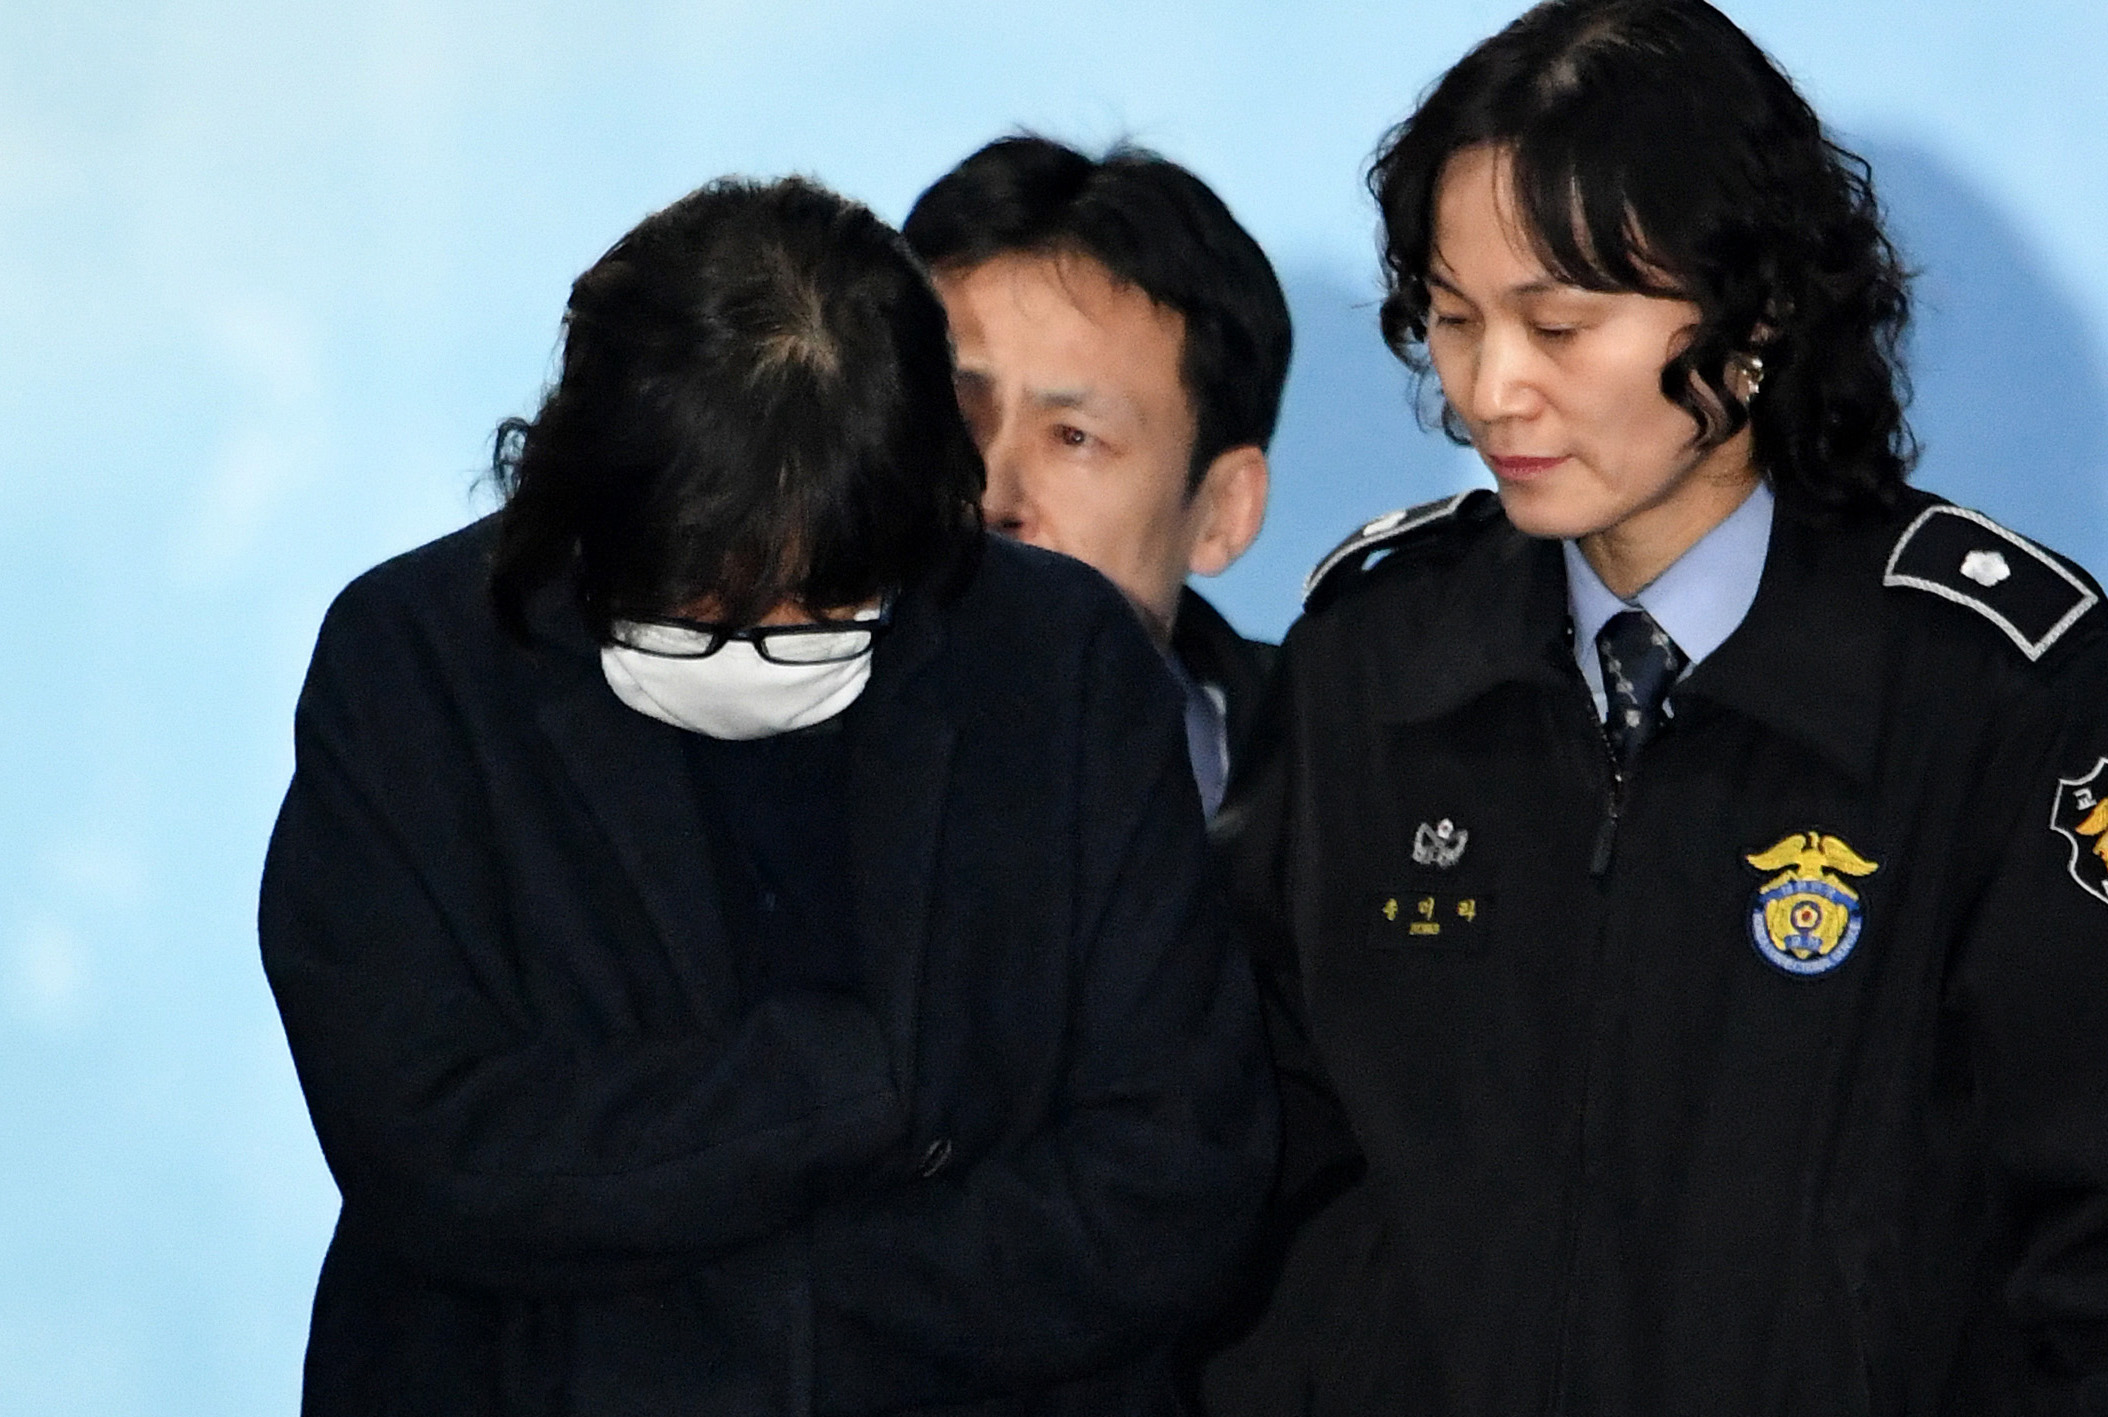 Choi Soon-Sil, front left, the woman at the heart of a lurid political scandal engulfing South Korea's President Park Geun-hye, is escorted following her formal arrest, from the Central District Court in Seoul on Nov. 3, 2016 (AFP/Getty Images)